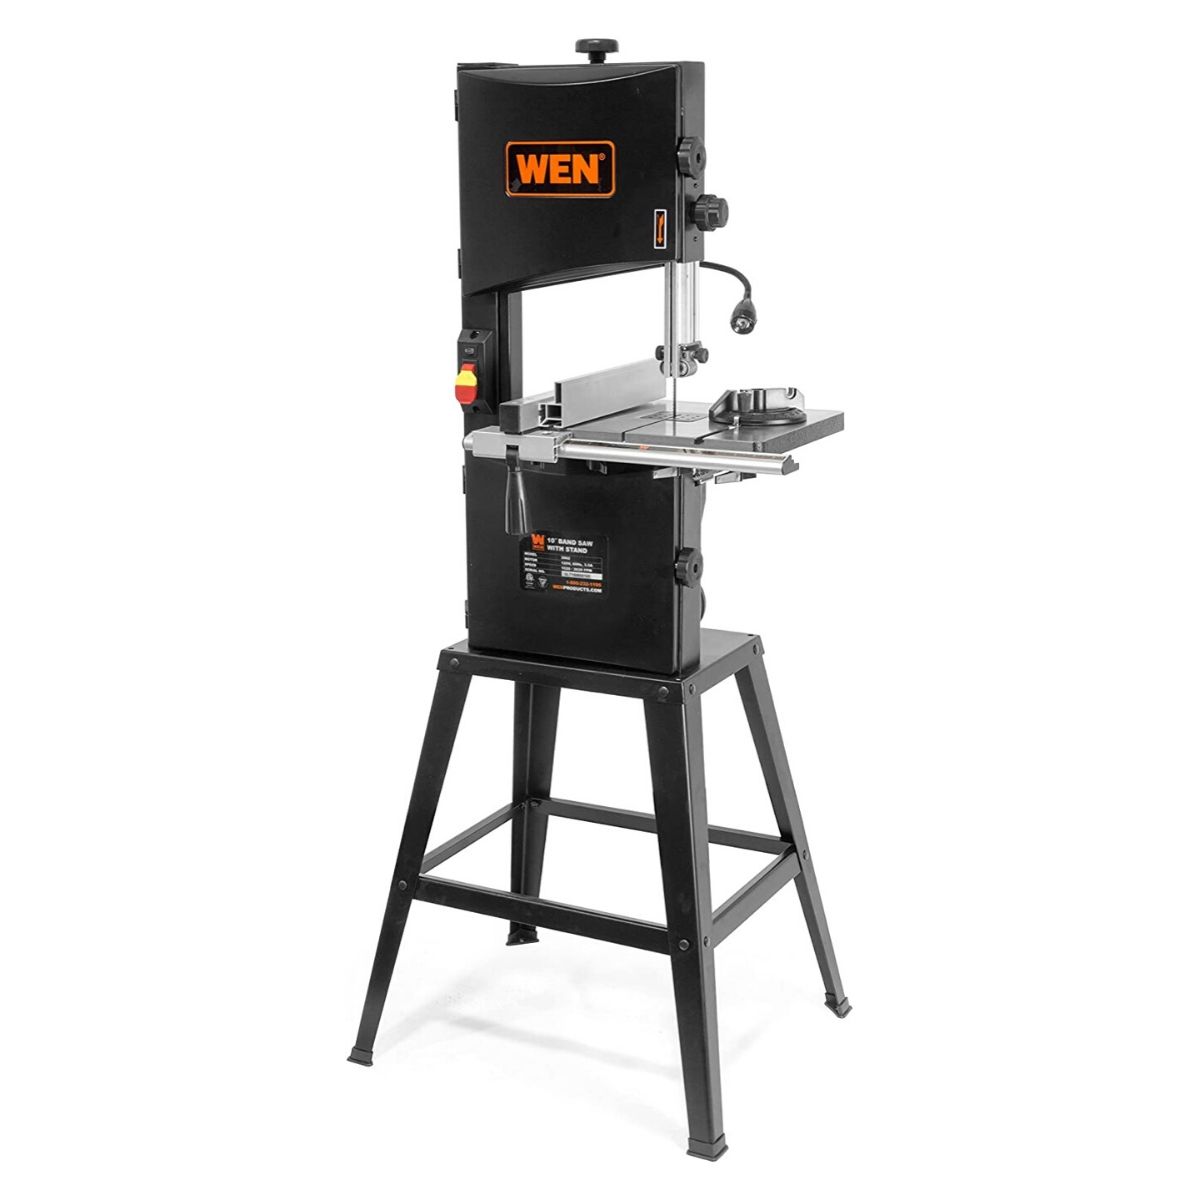 Wen 3962 Two-Speed Band Saw with Stand